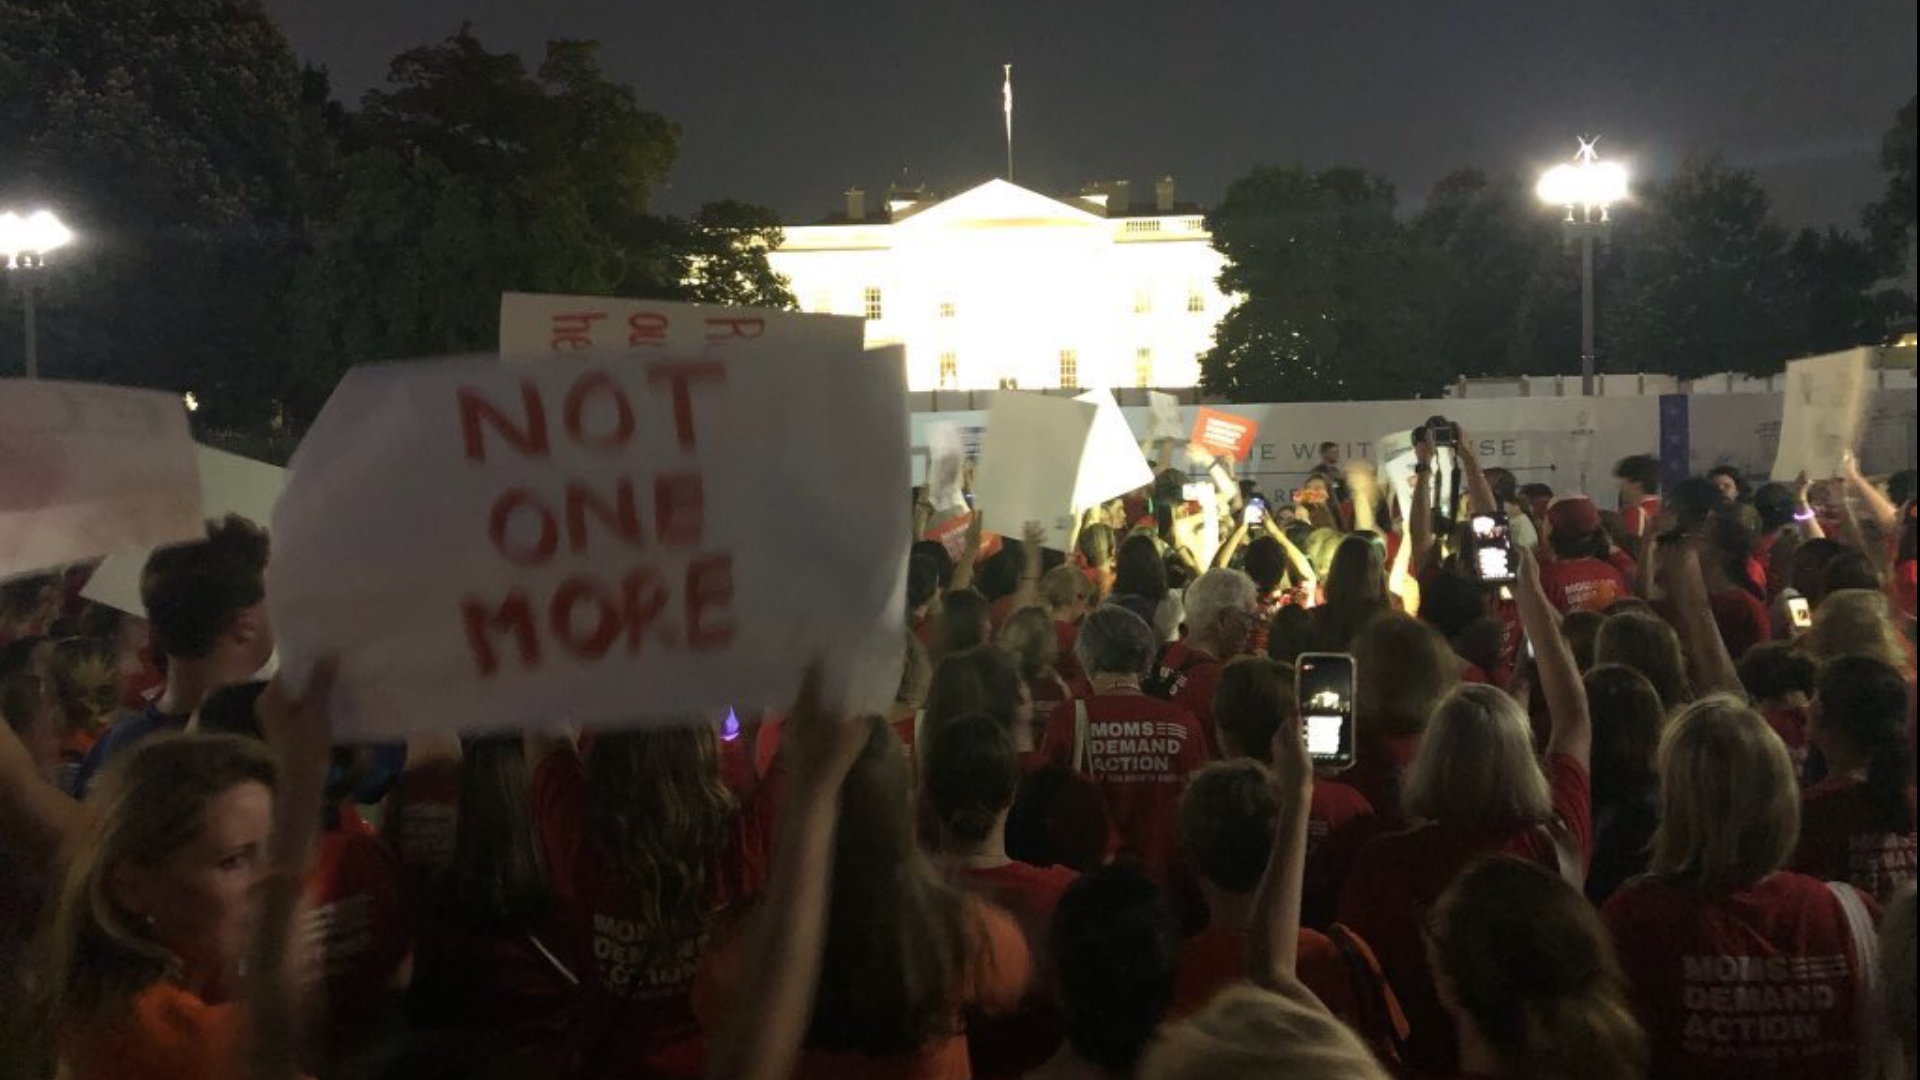 Moms Demand Action is a group of mothers from around the country who've had enough of gun violence. The group happened to be in the middle of their national conference in D.C., when they got the news of the horrific shootings in El Paso, TX and Dayton, OH.